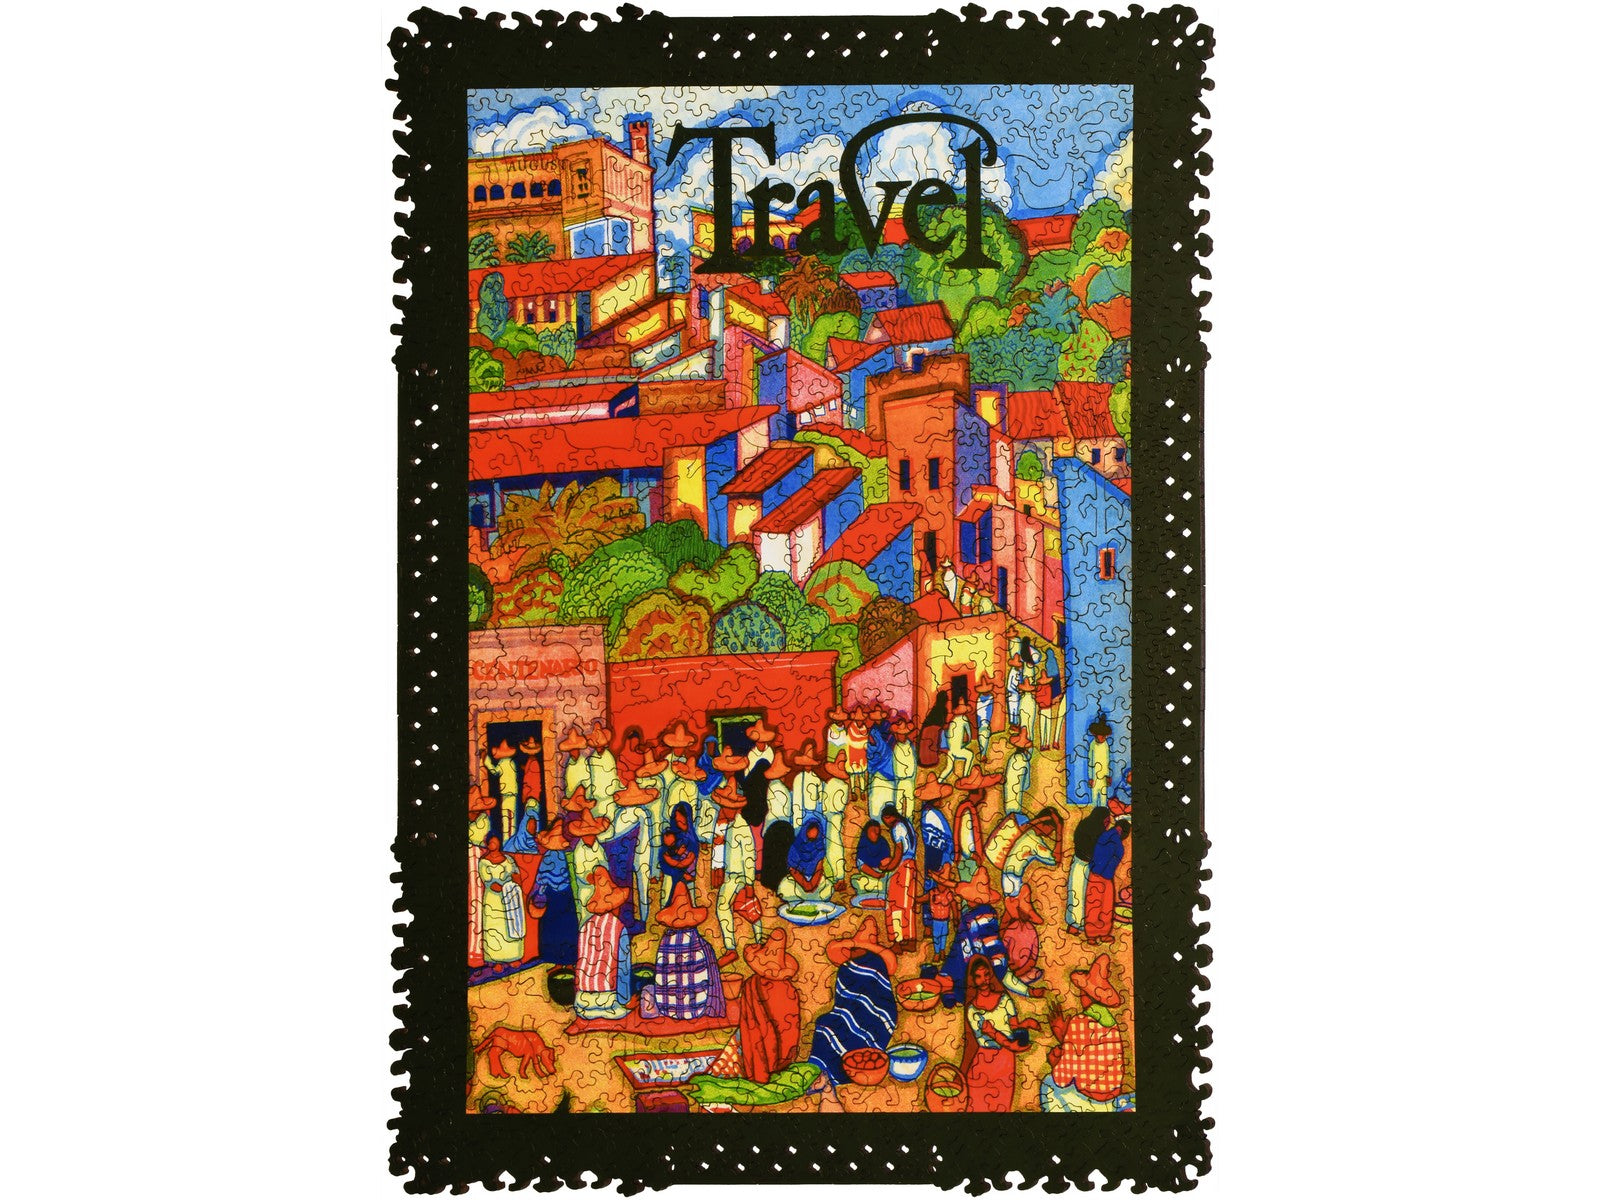 The front of the puzzle, Centenario, which shows a colorful village square in Mexico.